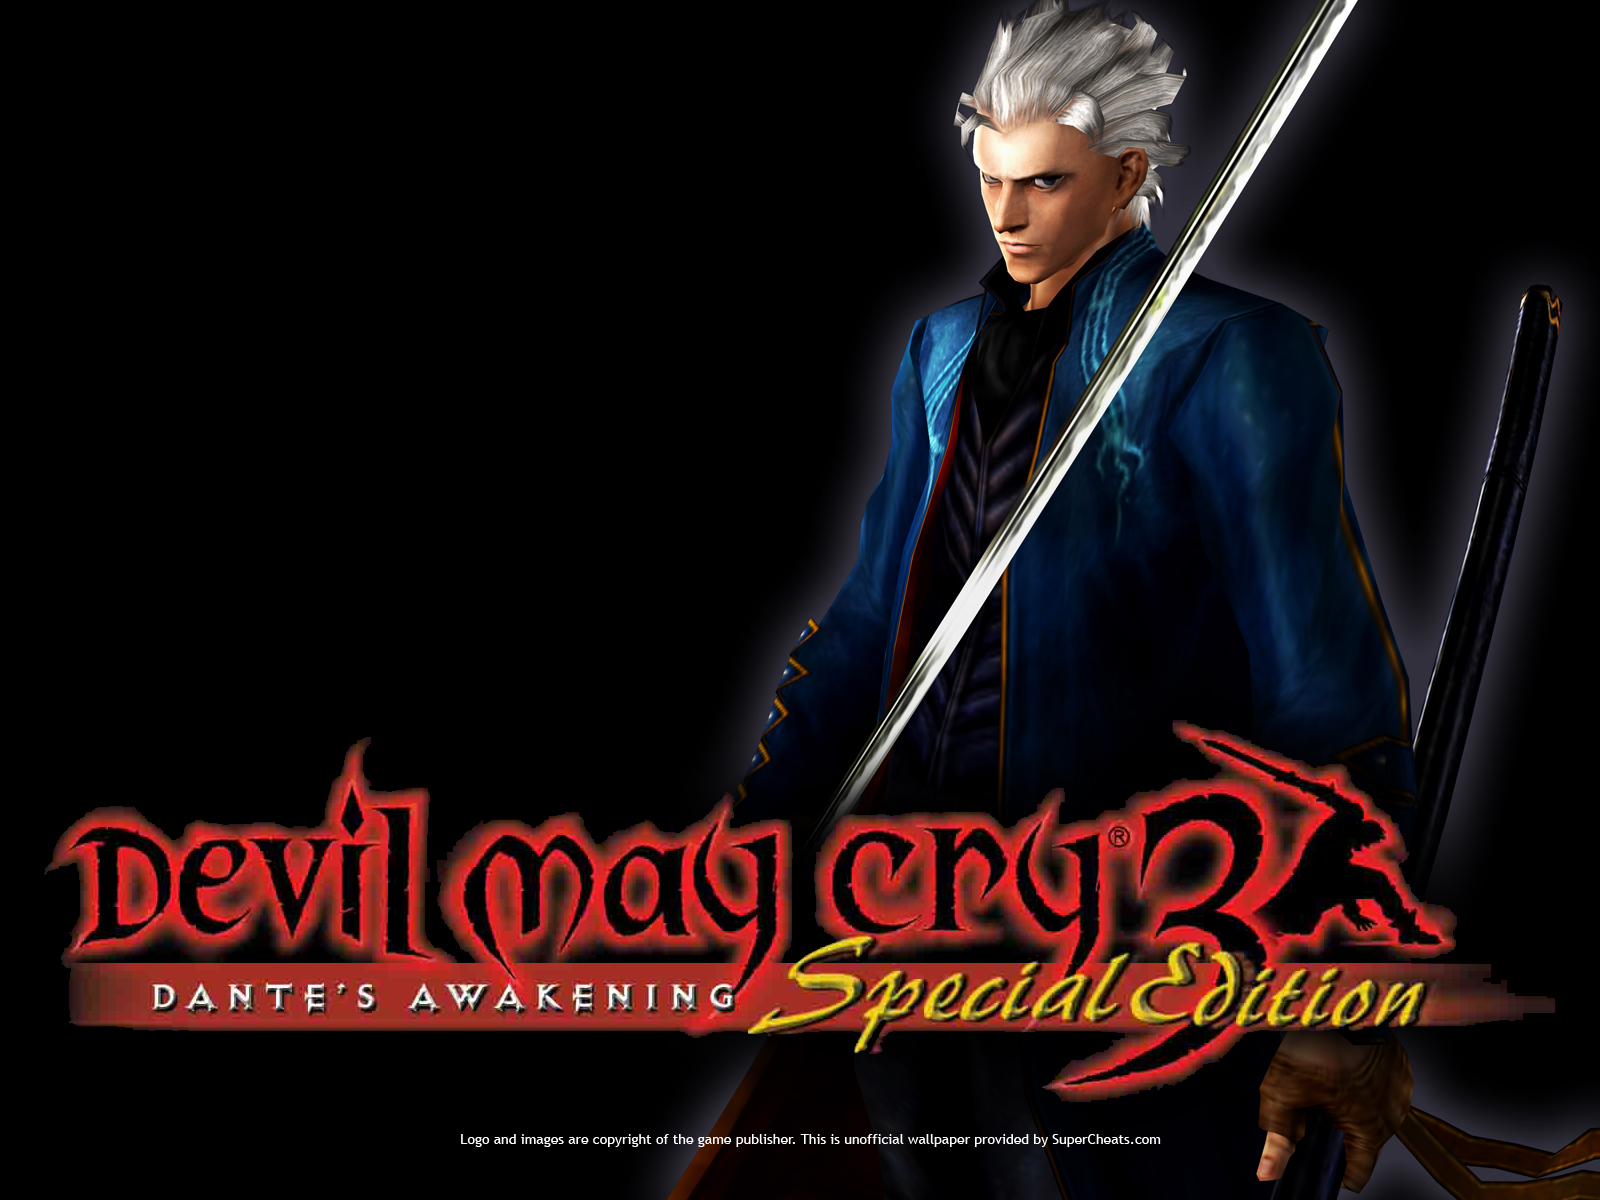 Devil+may+cry+3+special+edition+pc+download+free